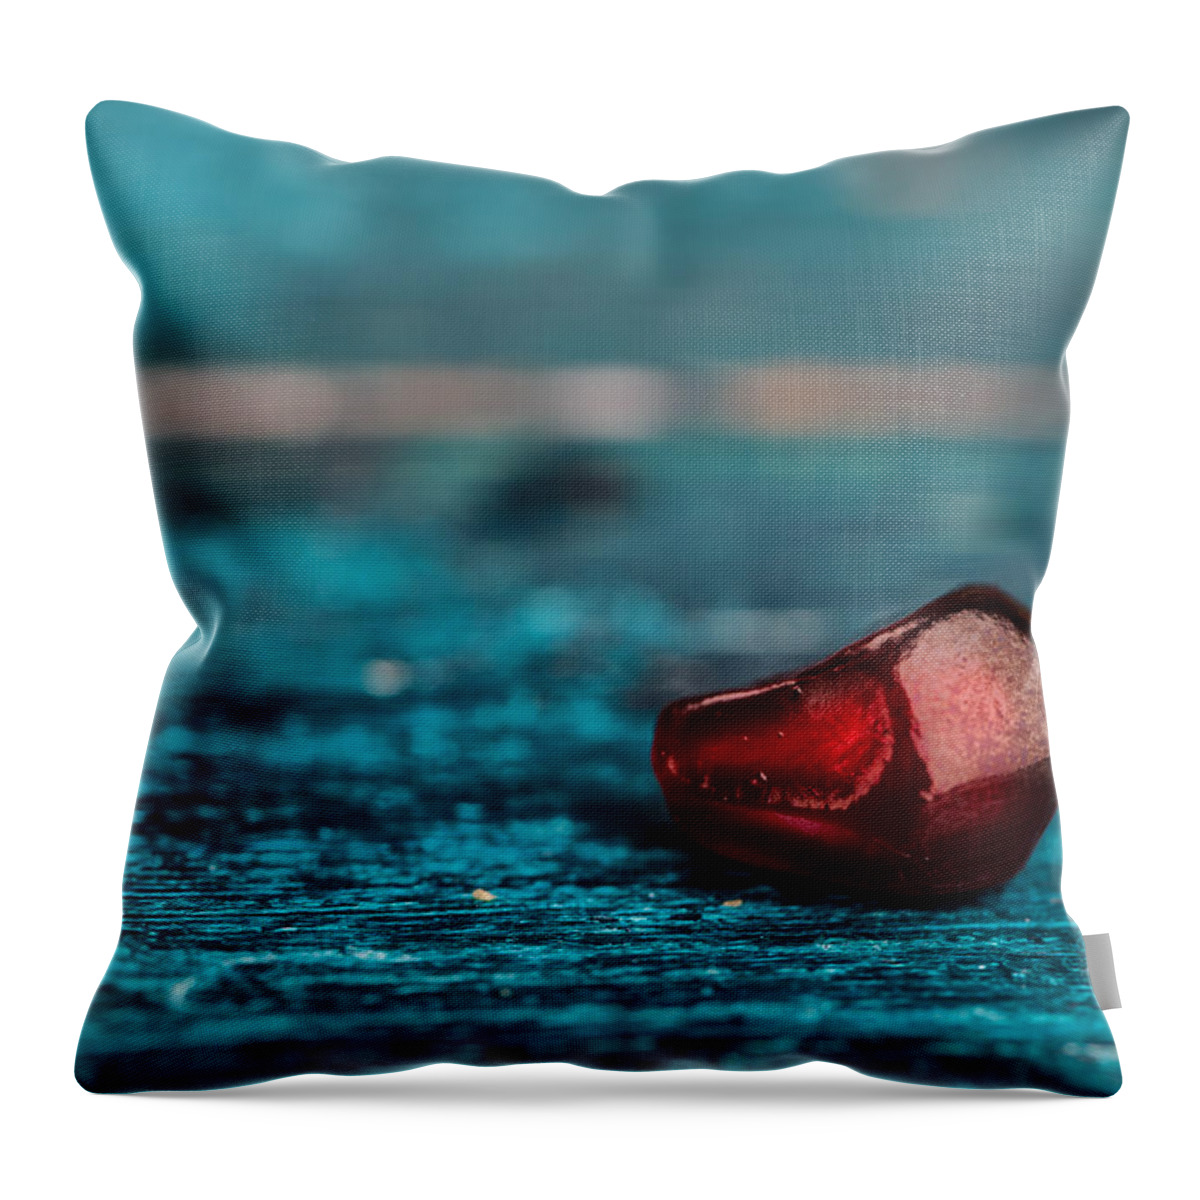 Pomegranate Throw Pillow featuring the photograph Pomegranate by Nailia Schwarz